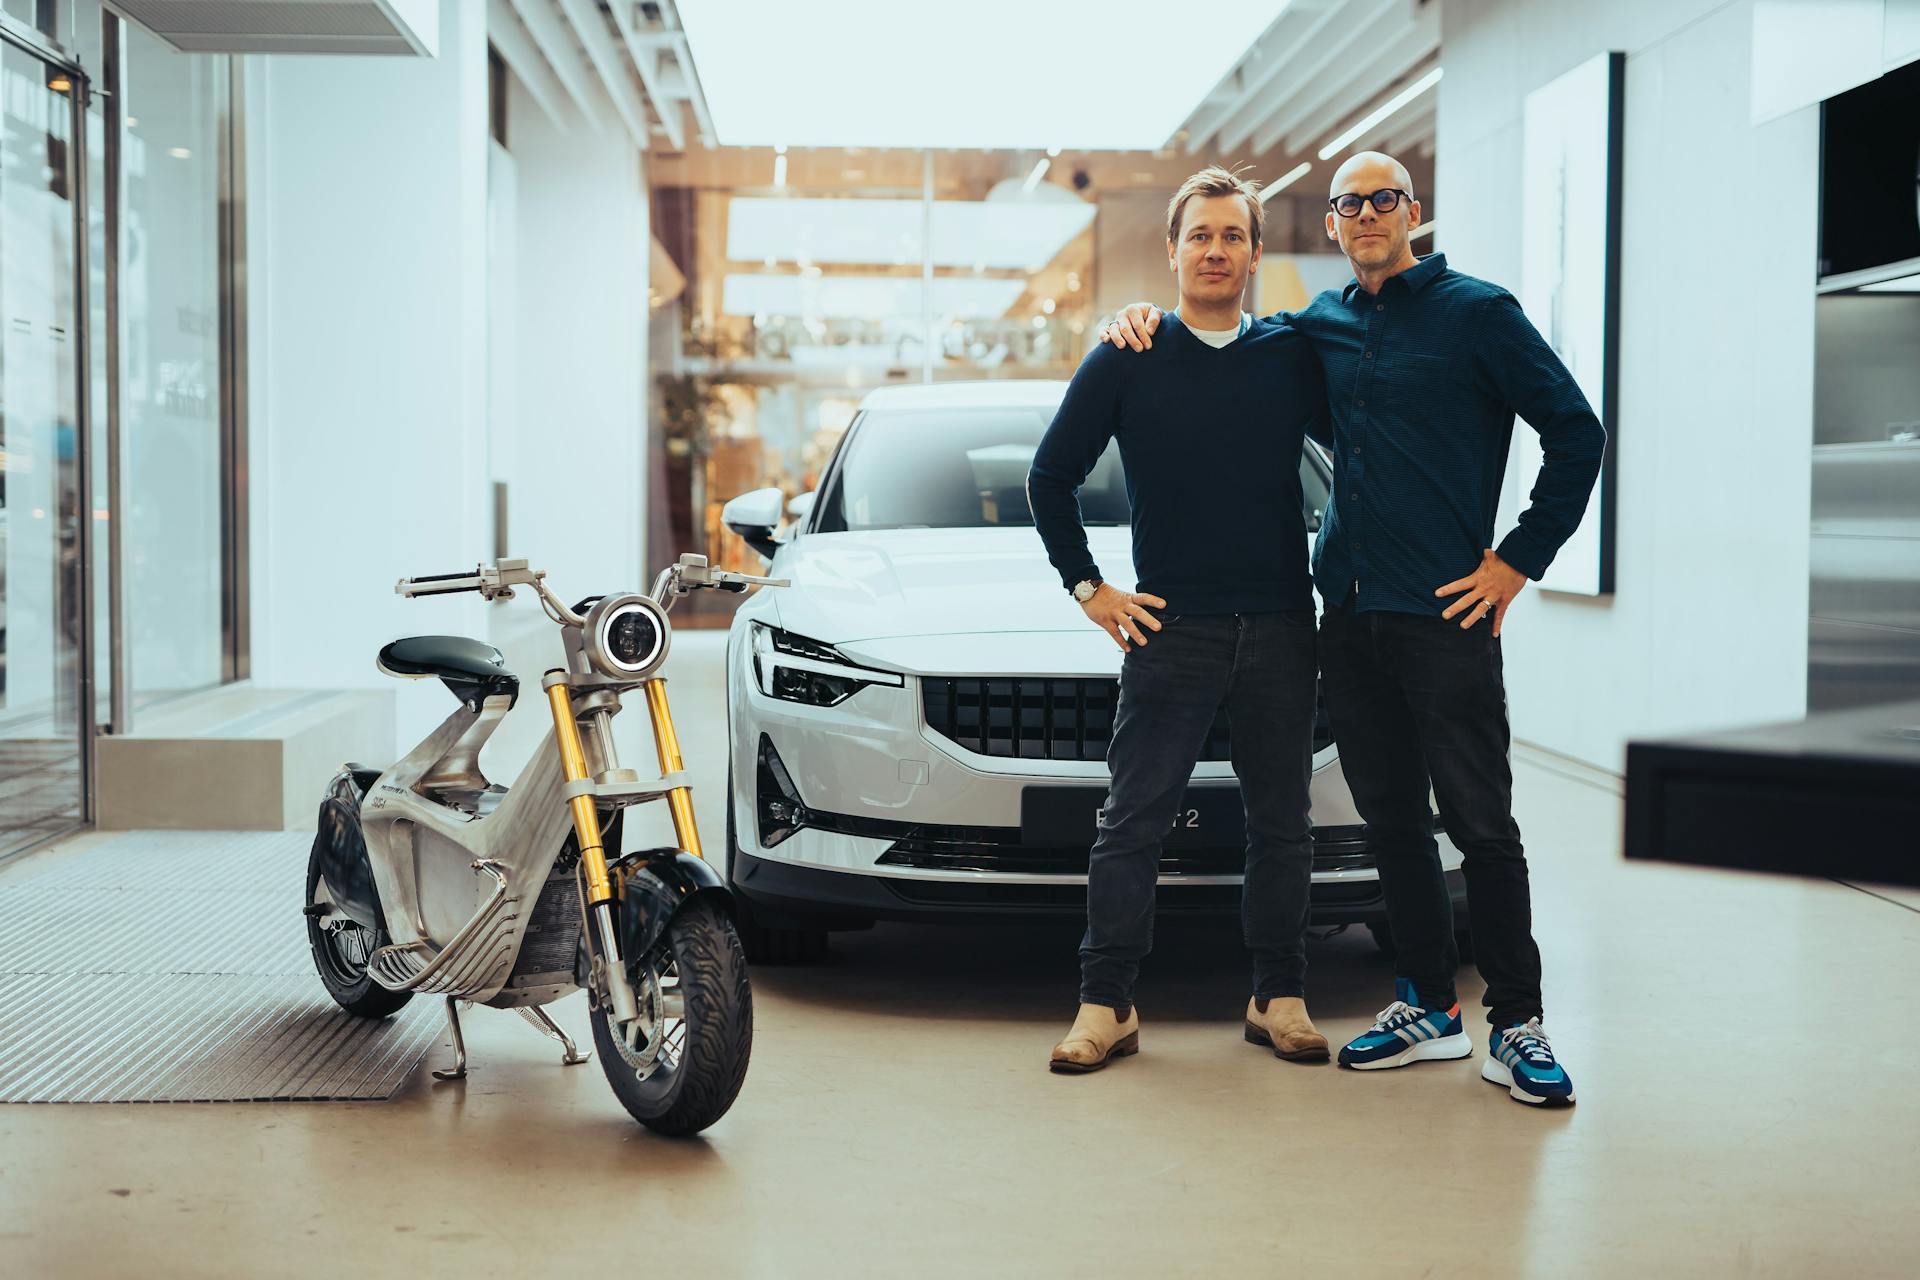 Image for STILRIDE collaborates with Polestar to produce the world's first climate neutral car